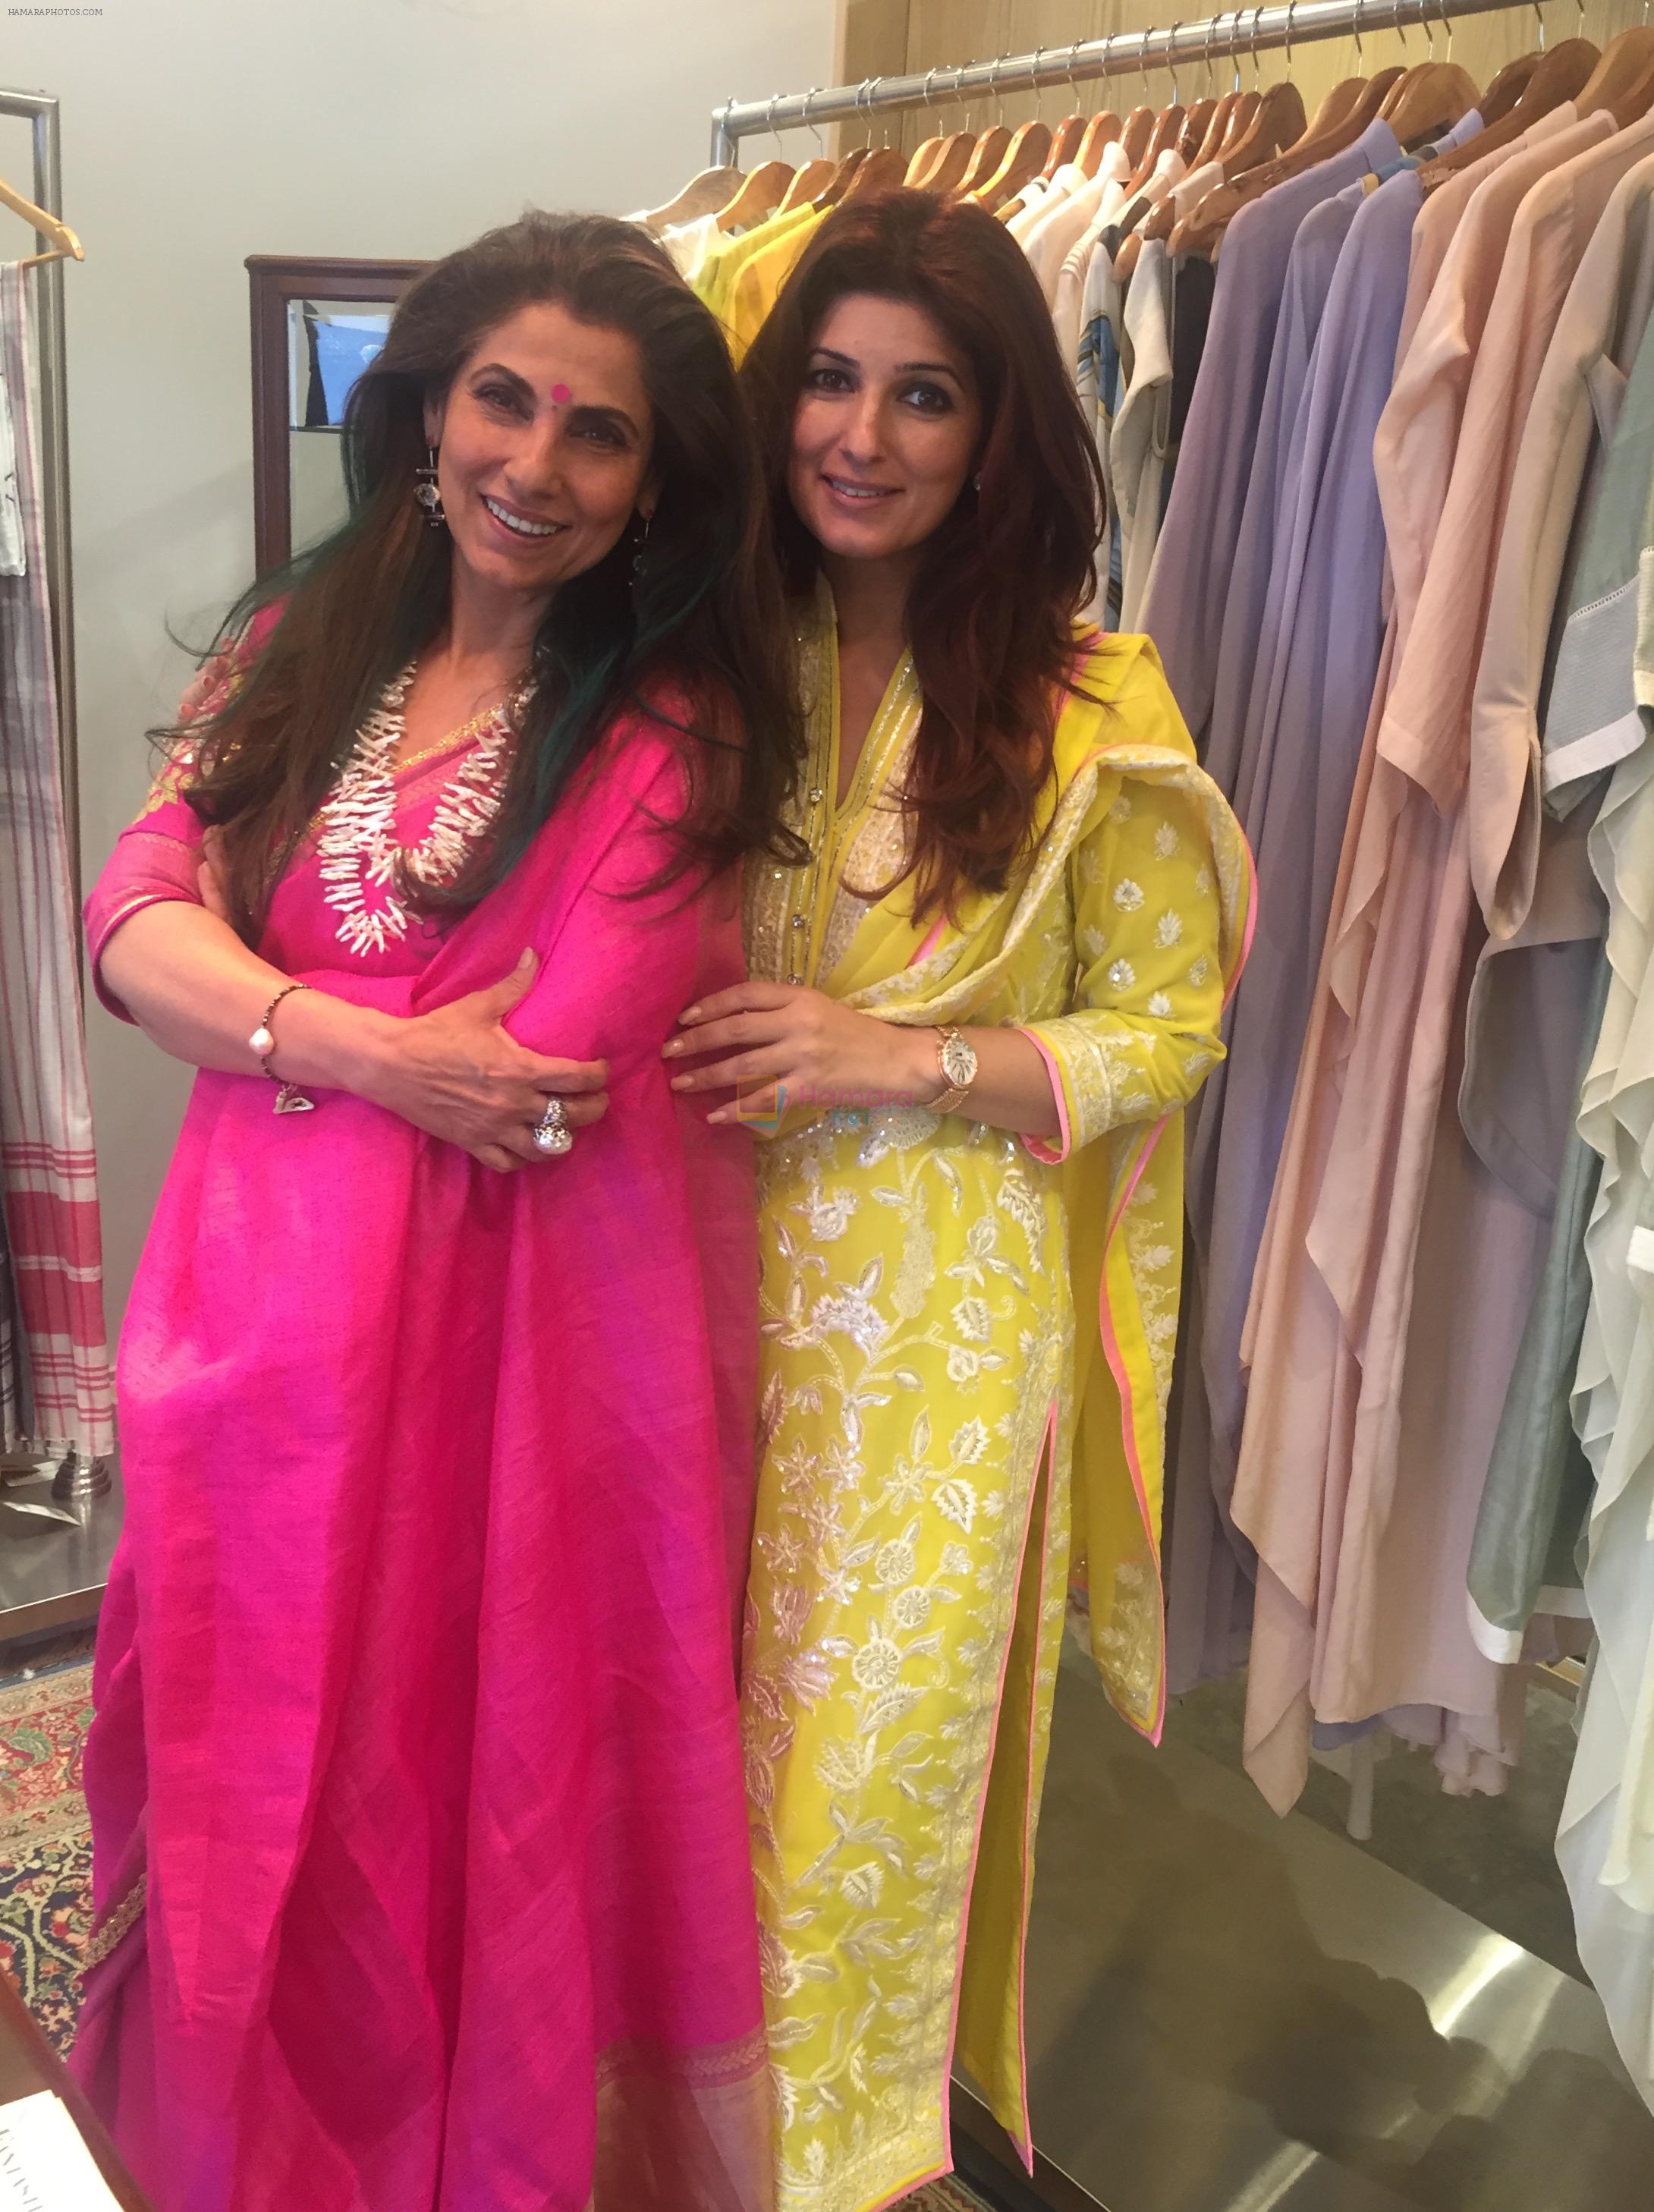 Dimple Kapadia and Twinkle Khanna at the launch of FANTASTIQUE by Abu Sandeep on 15th July 2016